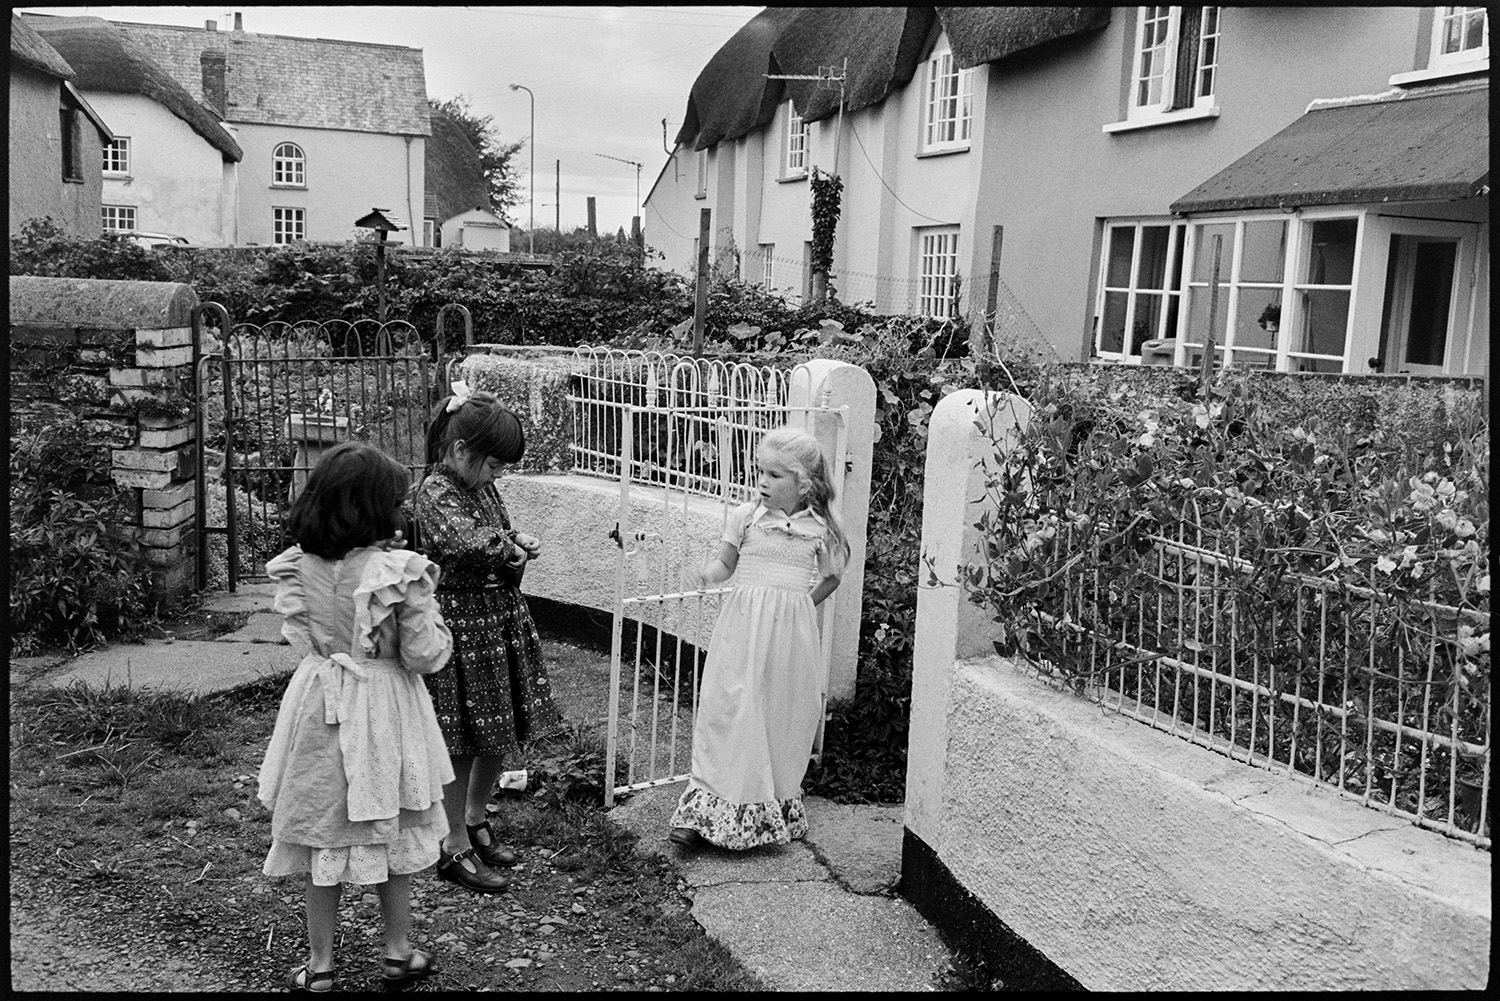 Birthday party with children in party dresses. 
[Three girls in party dresses by railings outside the thatched cottage of Quillets, Dolton, for Hannah Bignell's birthday party. The cottage was previously known as Park View.]